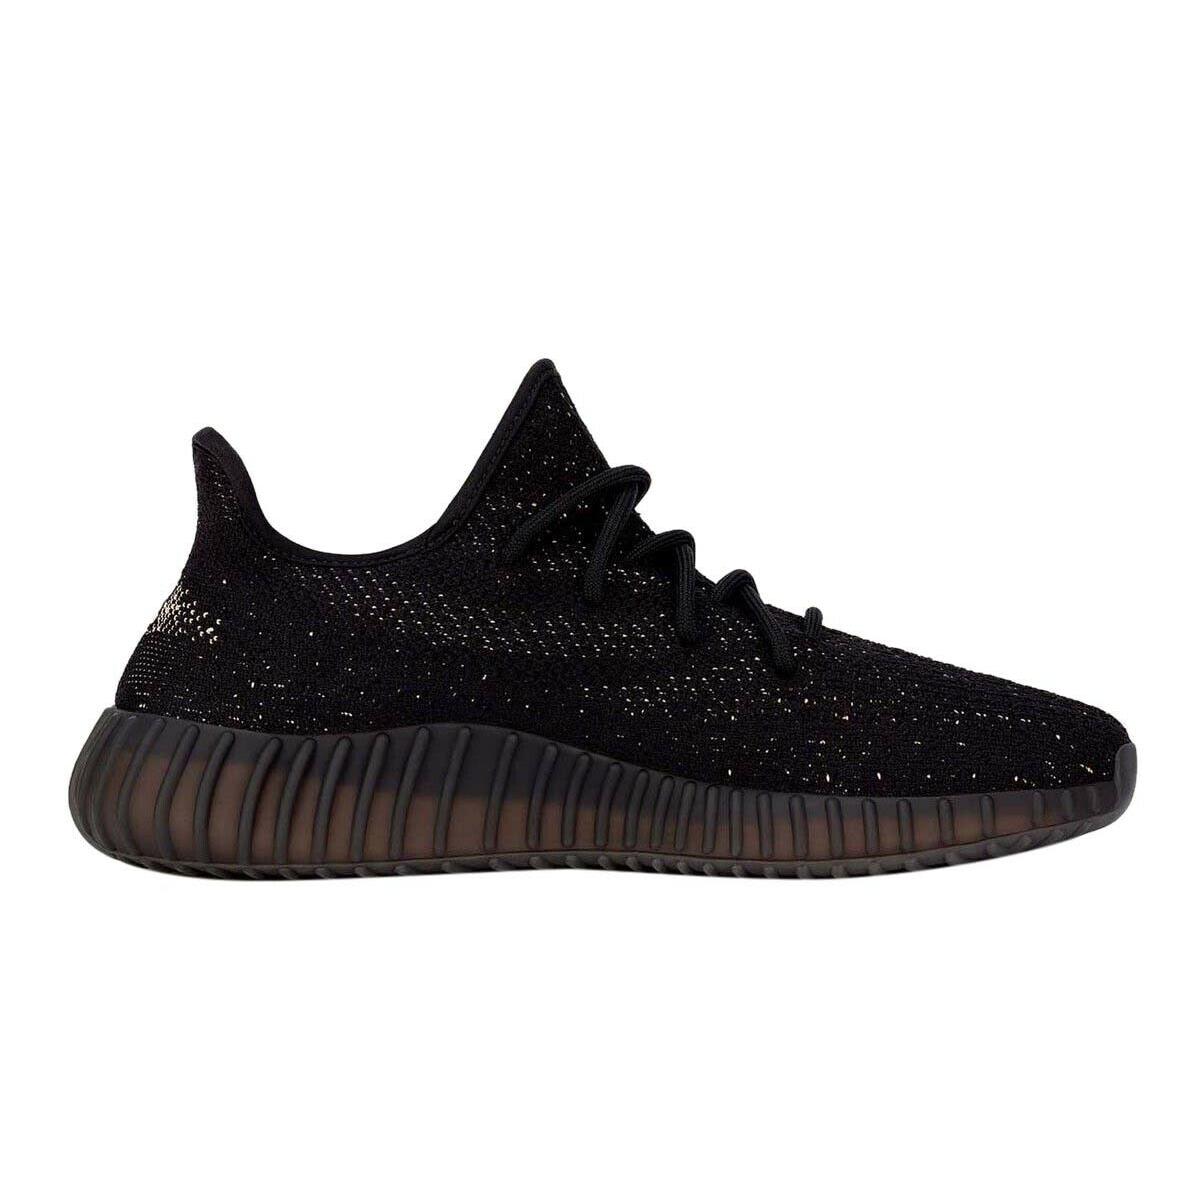 Adidas shoes Yeezy Boost - Black 1